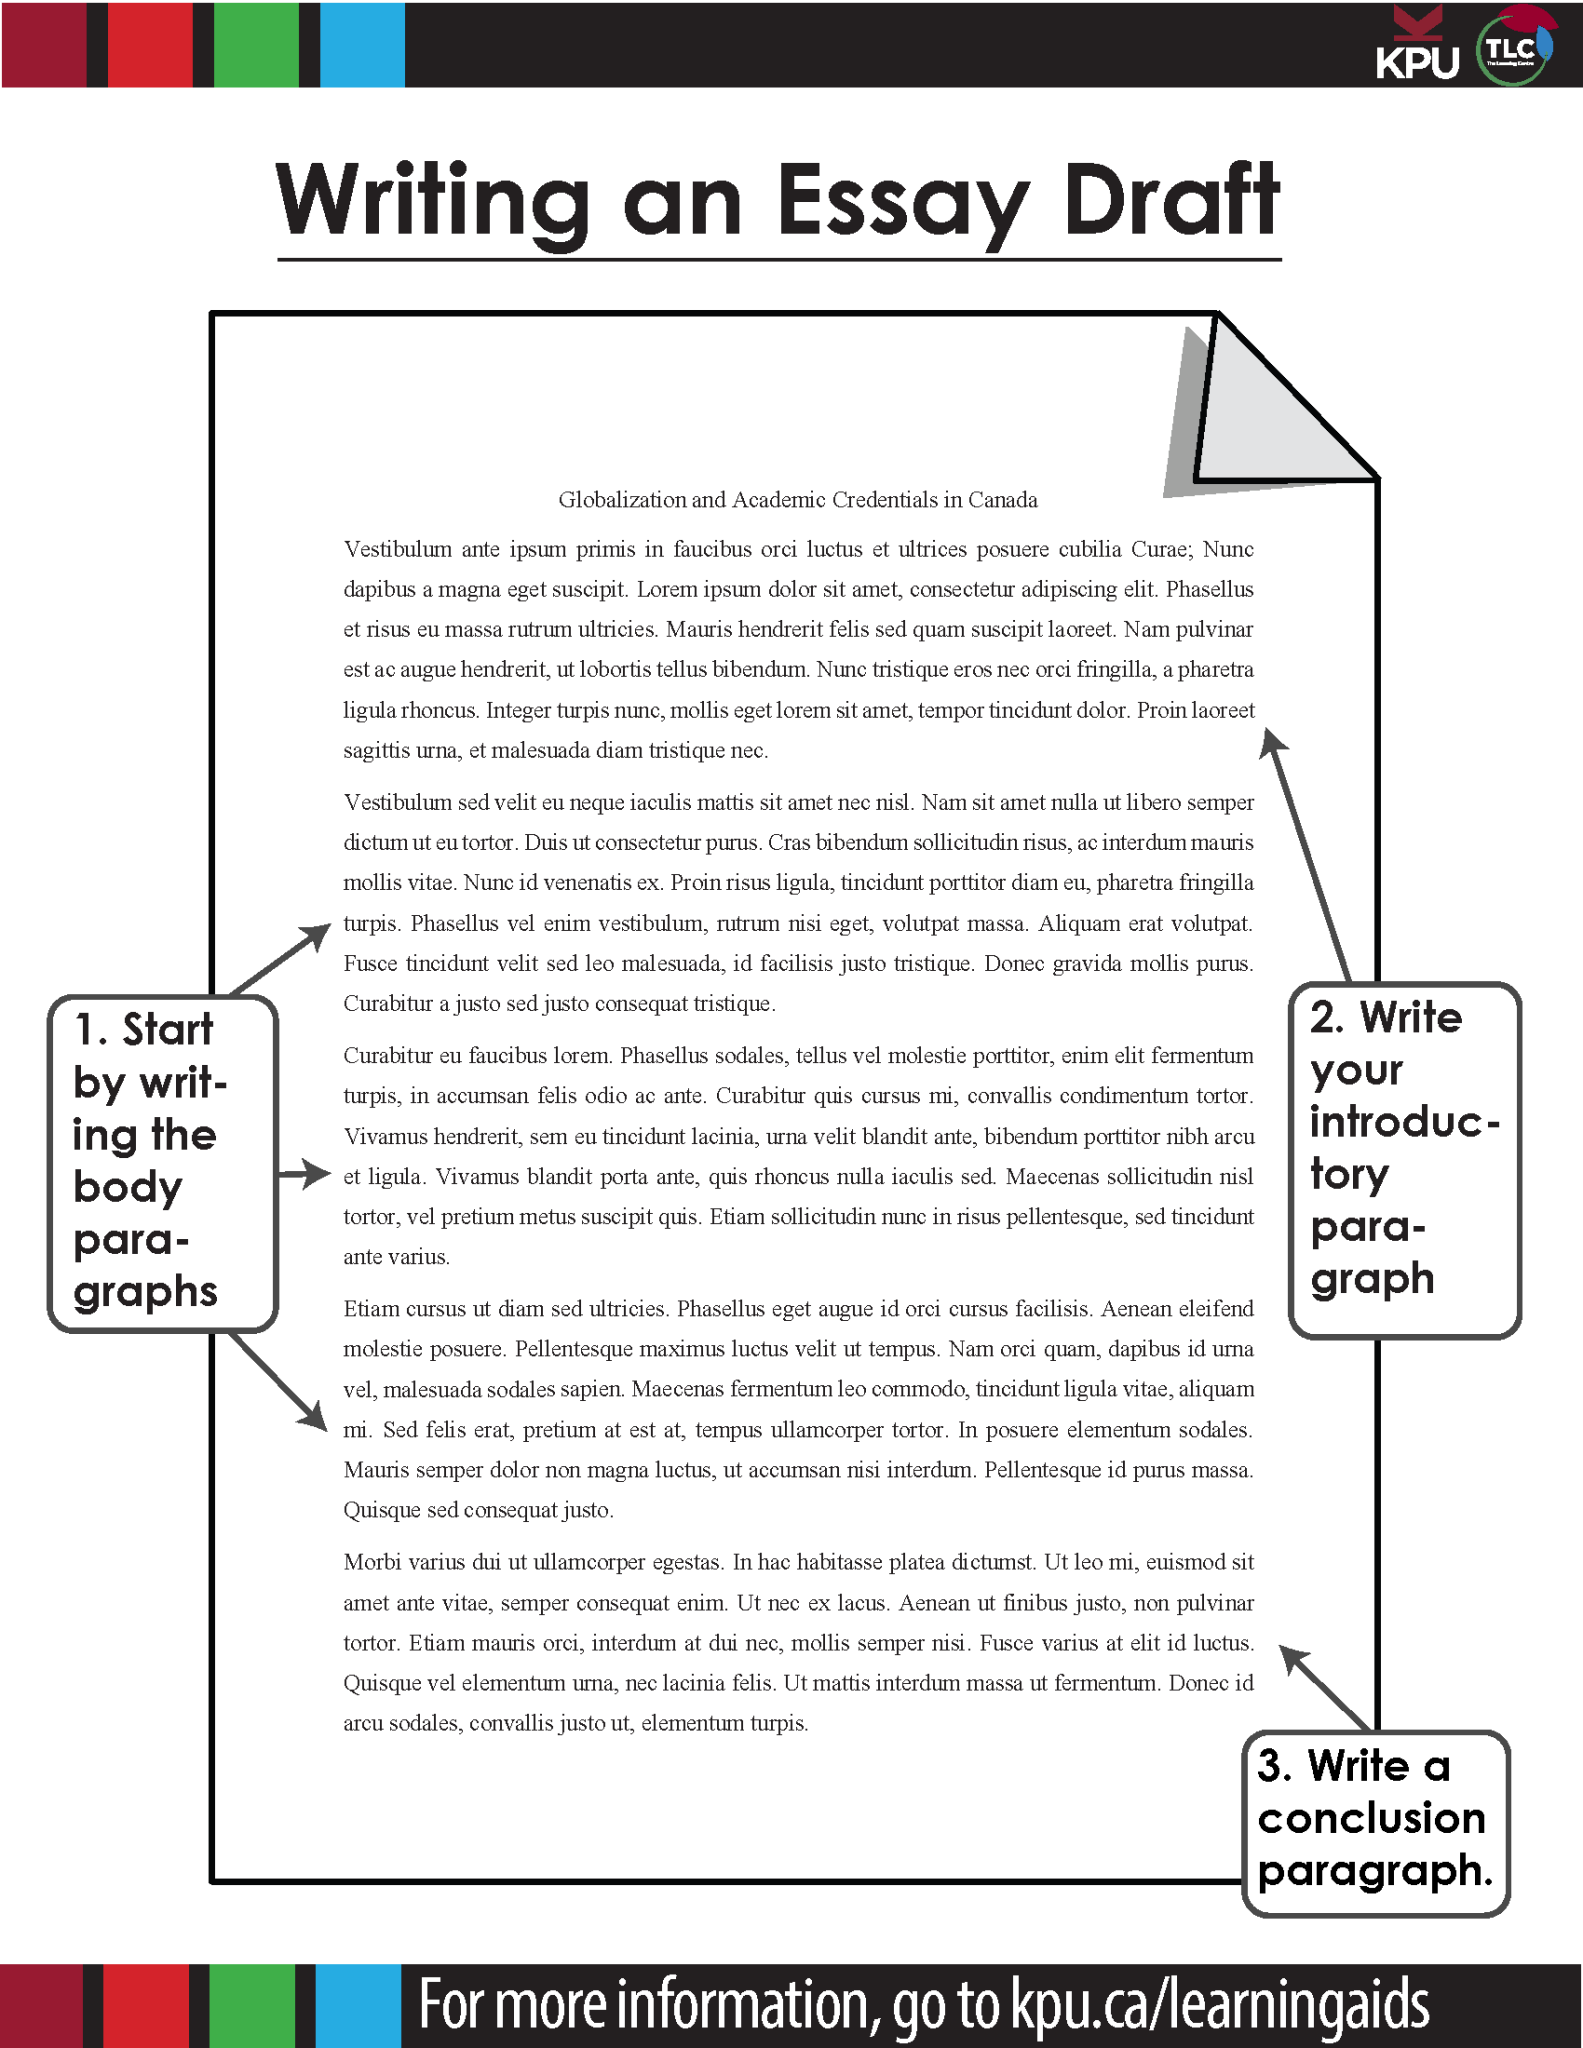 Essay Draft. Essay writing. The essays. How to write an essay. How to start writing